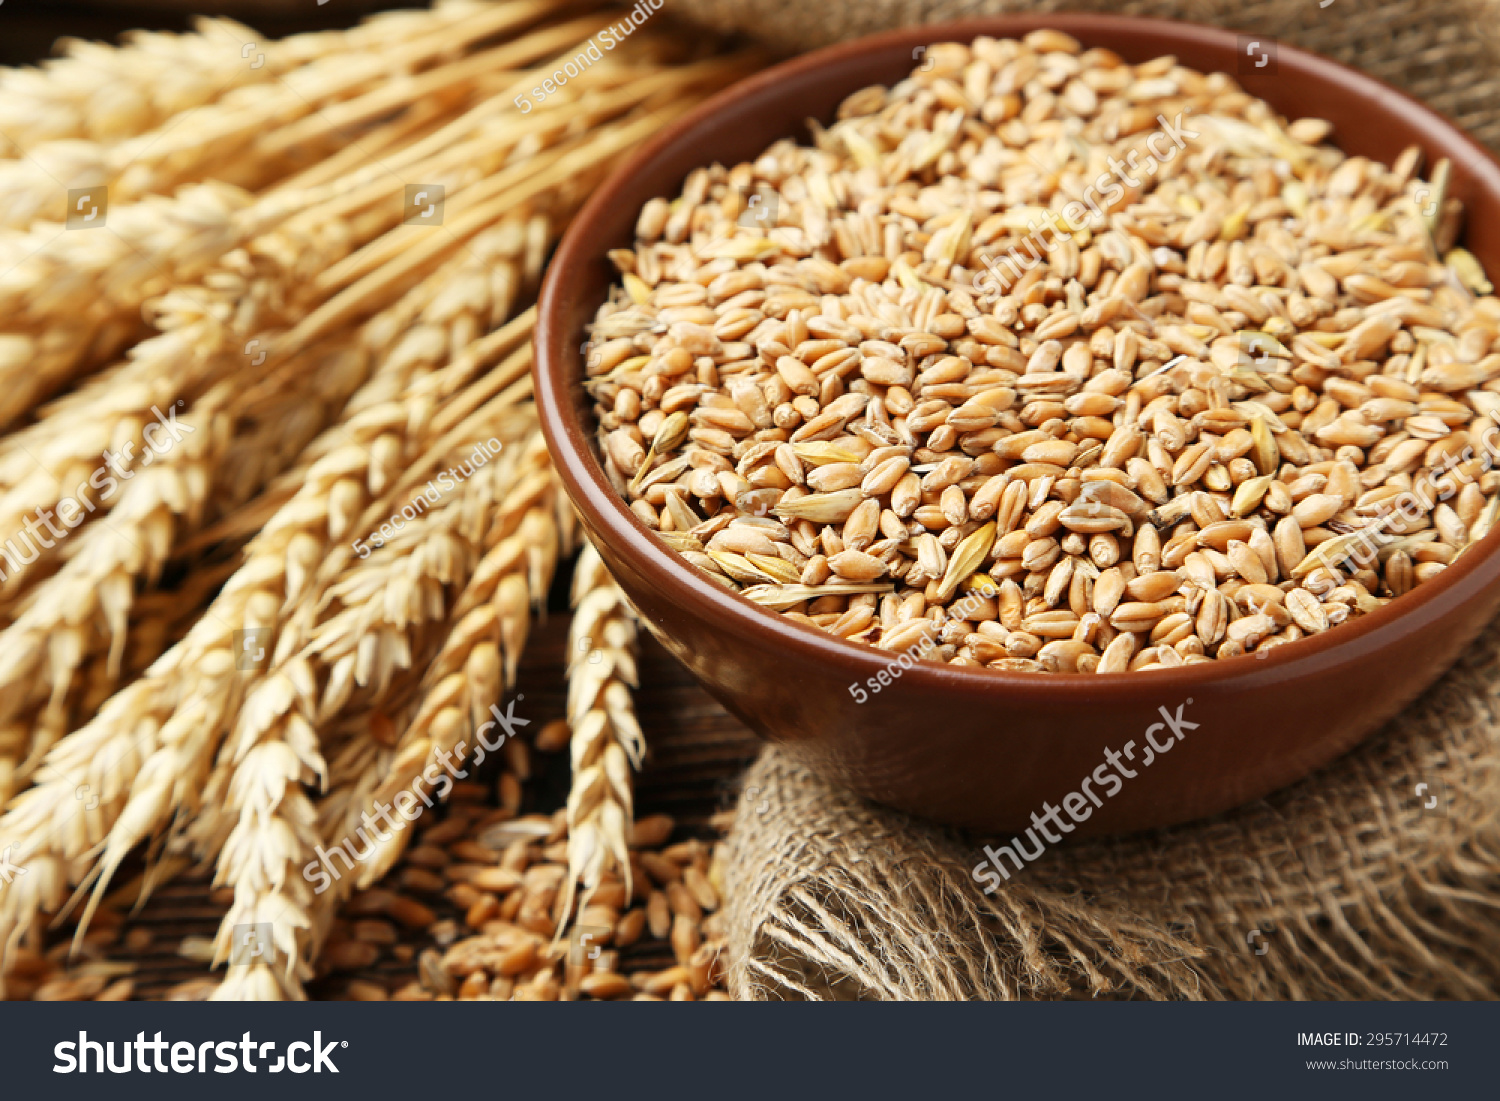 Ears of wheat and bowl of wheat grains on brown wooden background #295714472